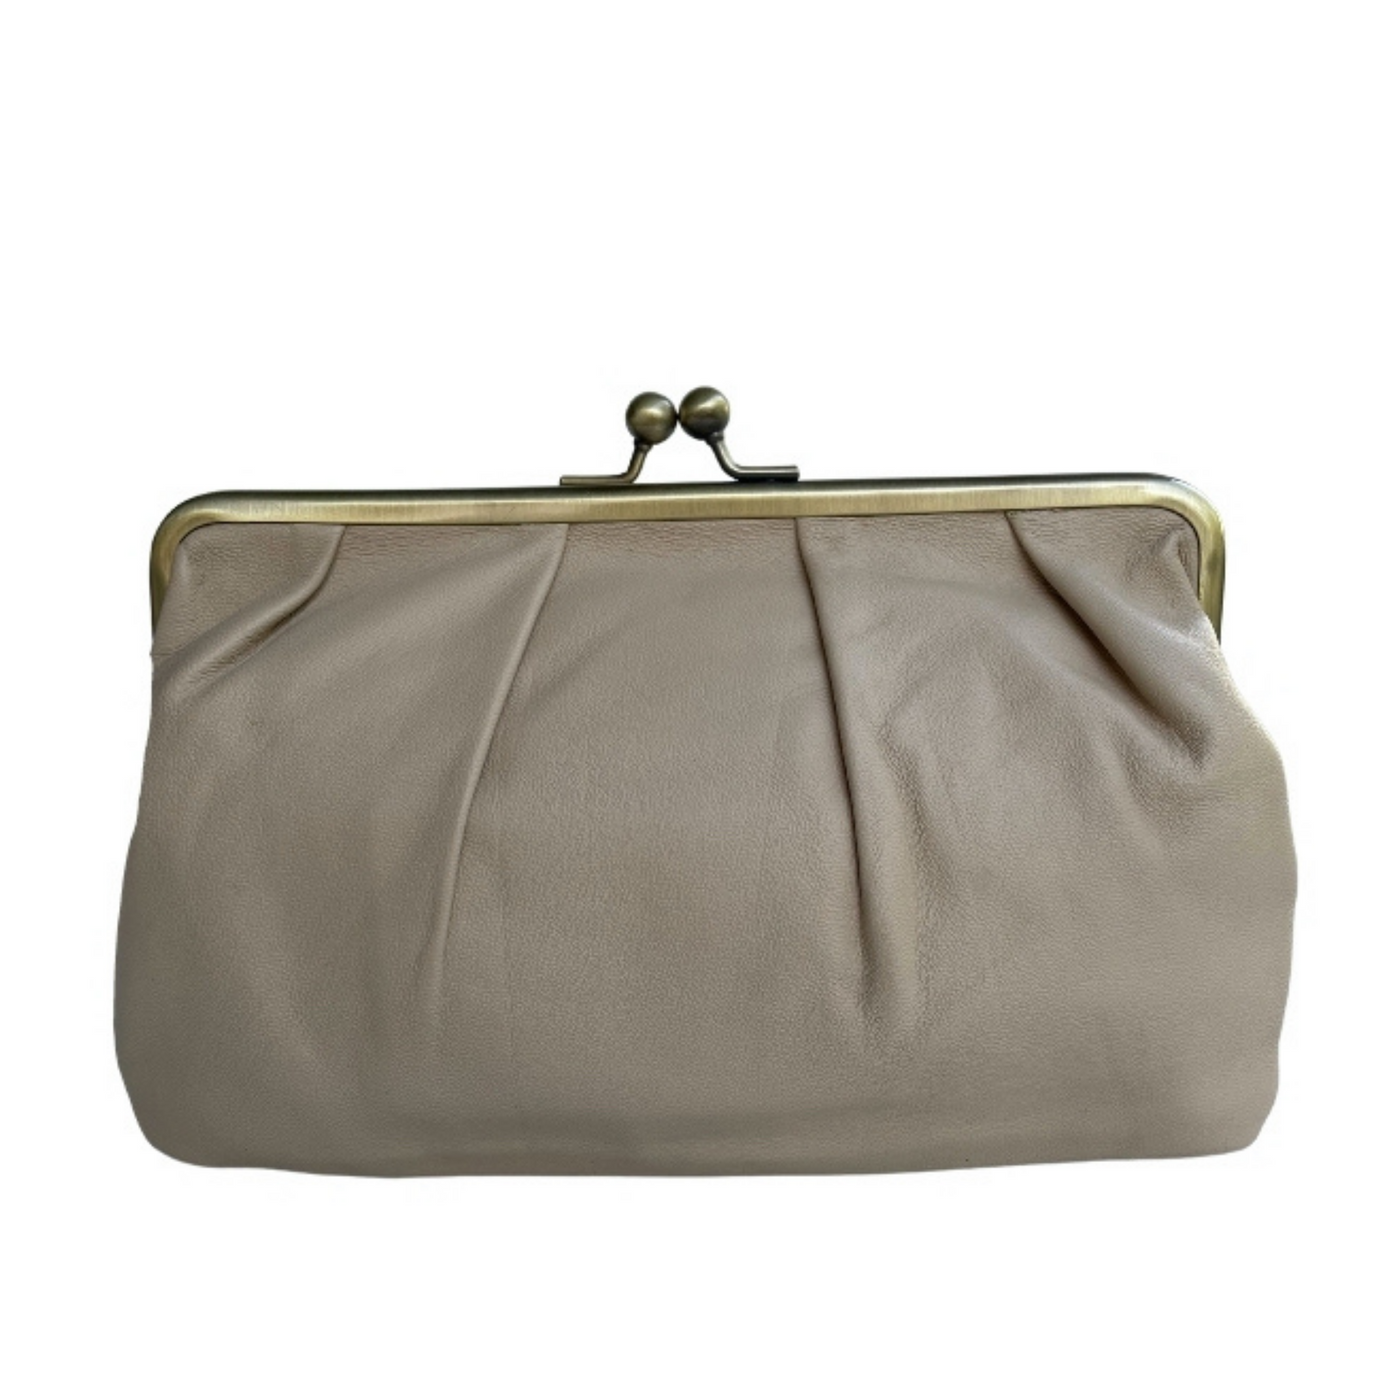 Champagne Leather June Clutch